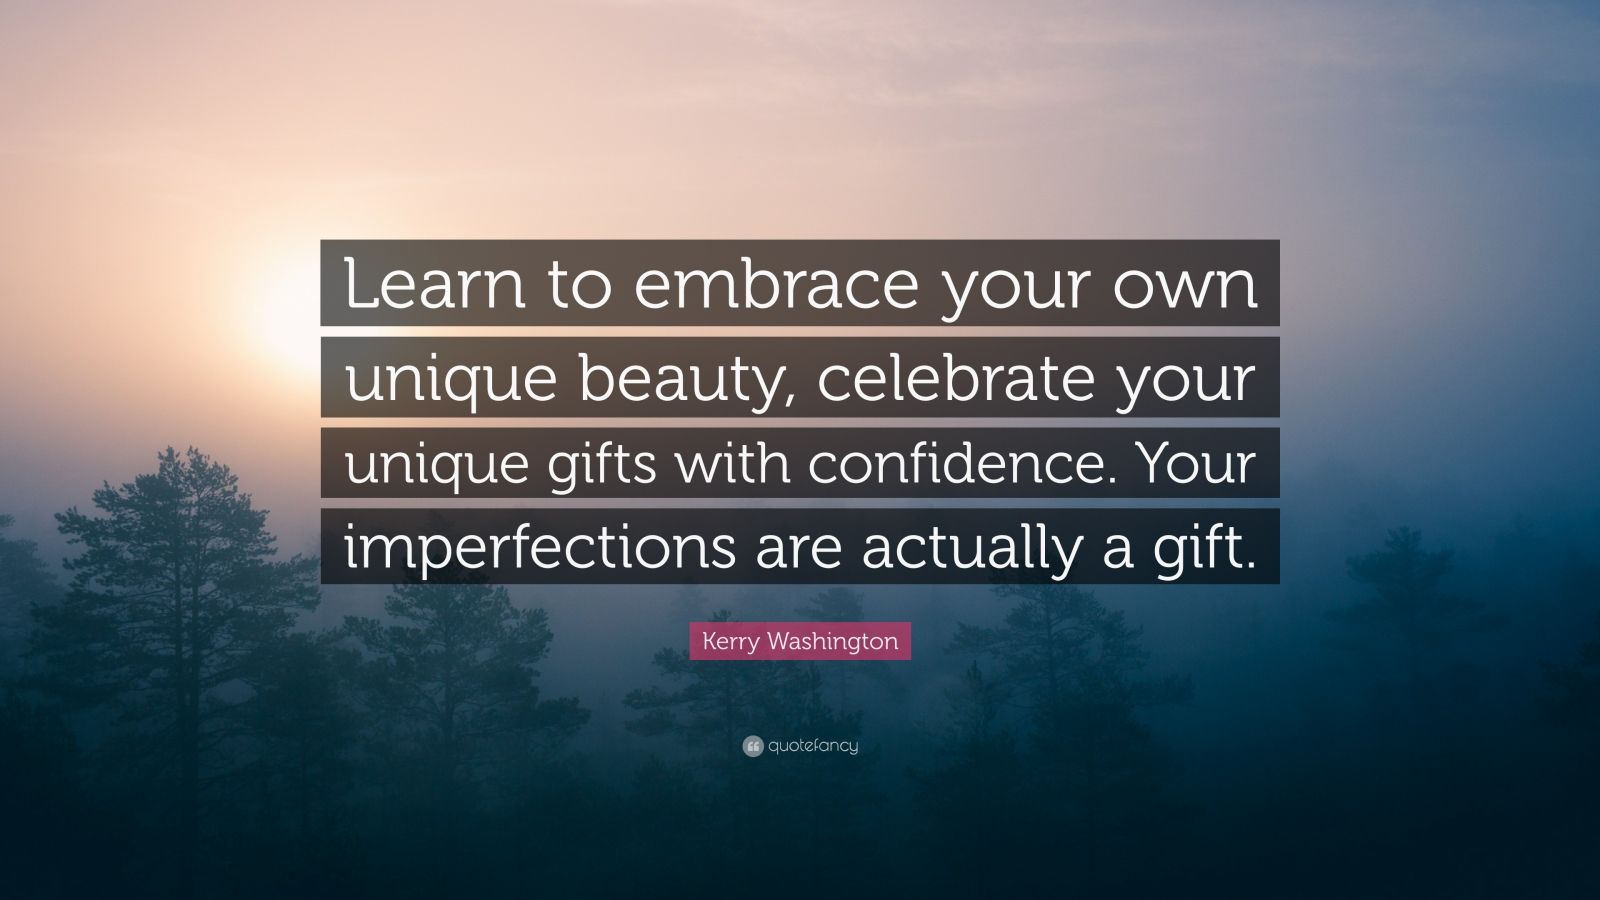 Kerry Washington Quote: "Learn to embrace your own unique ...